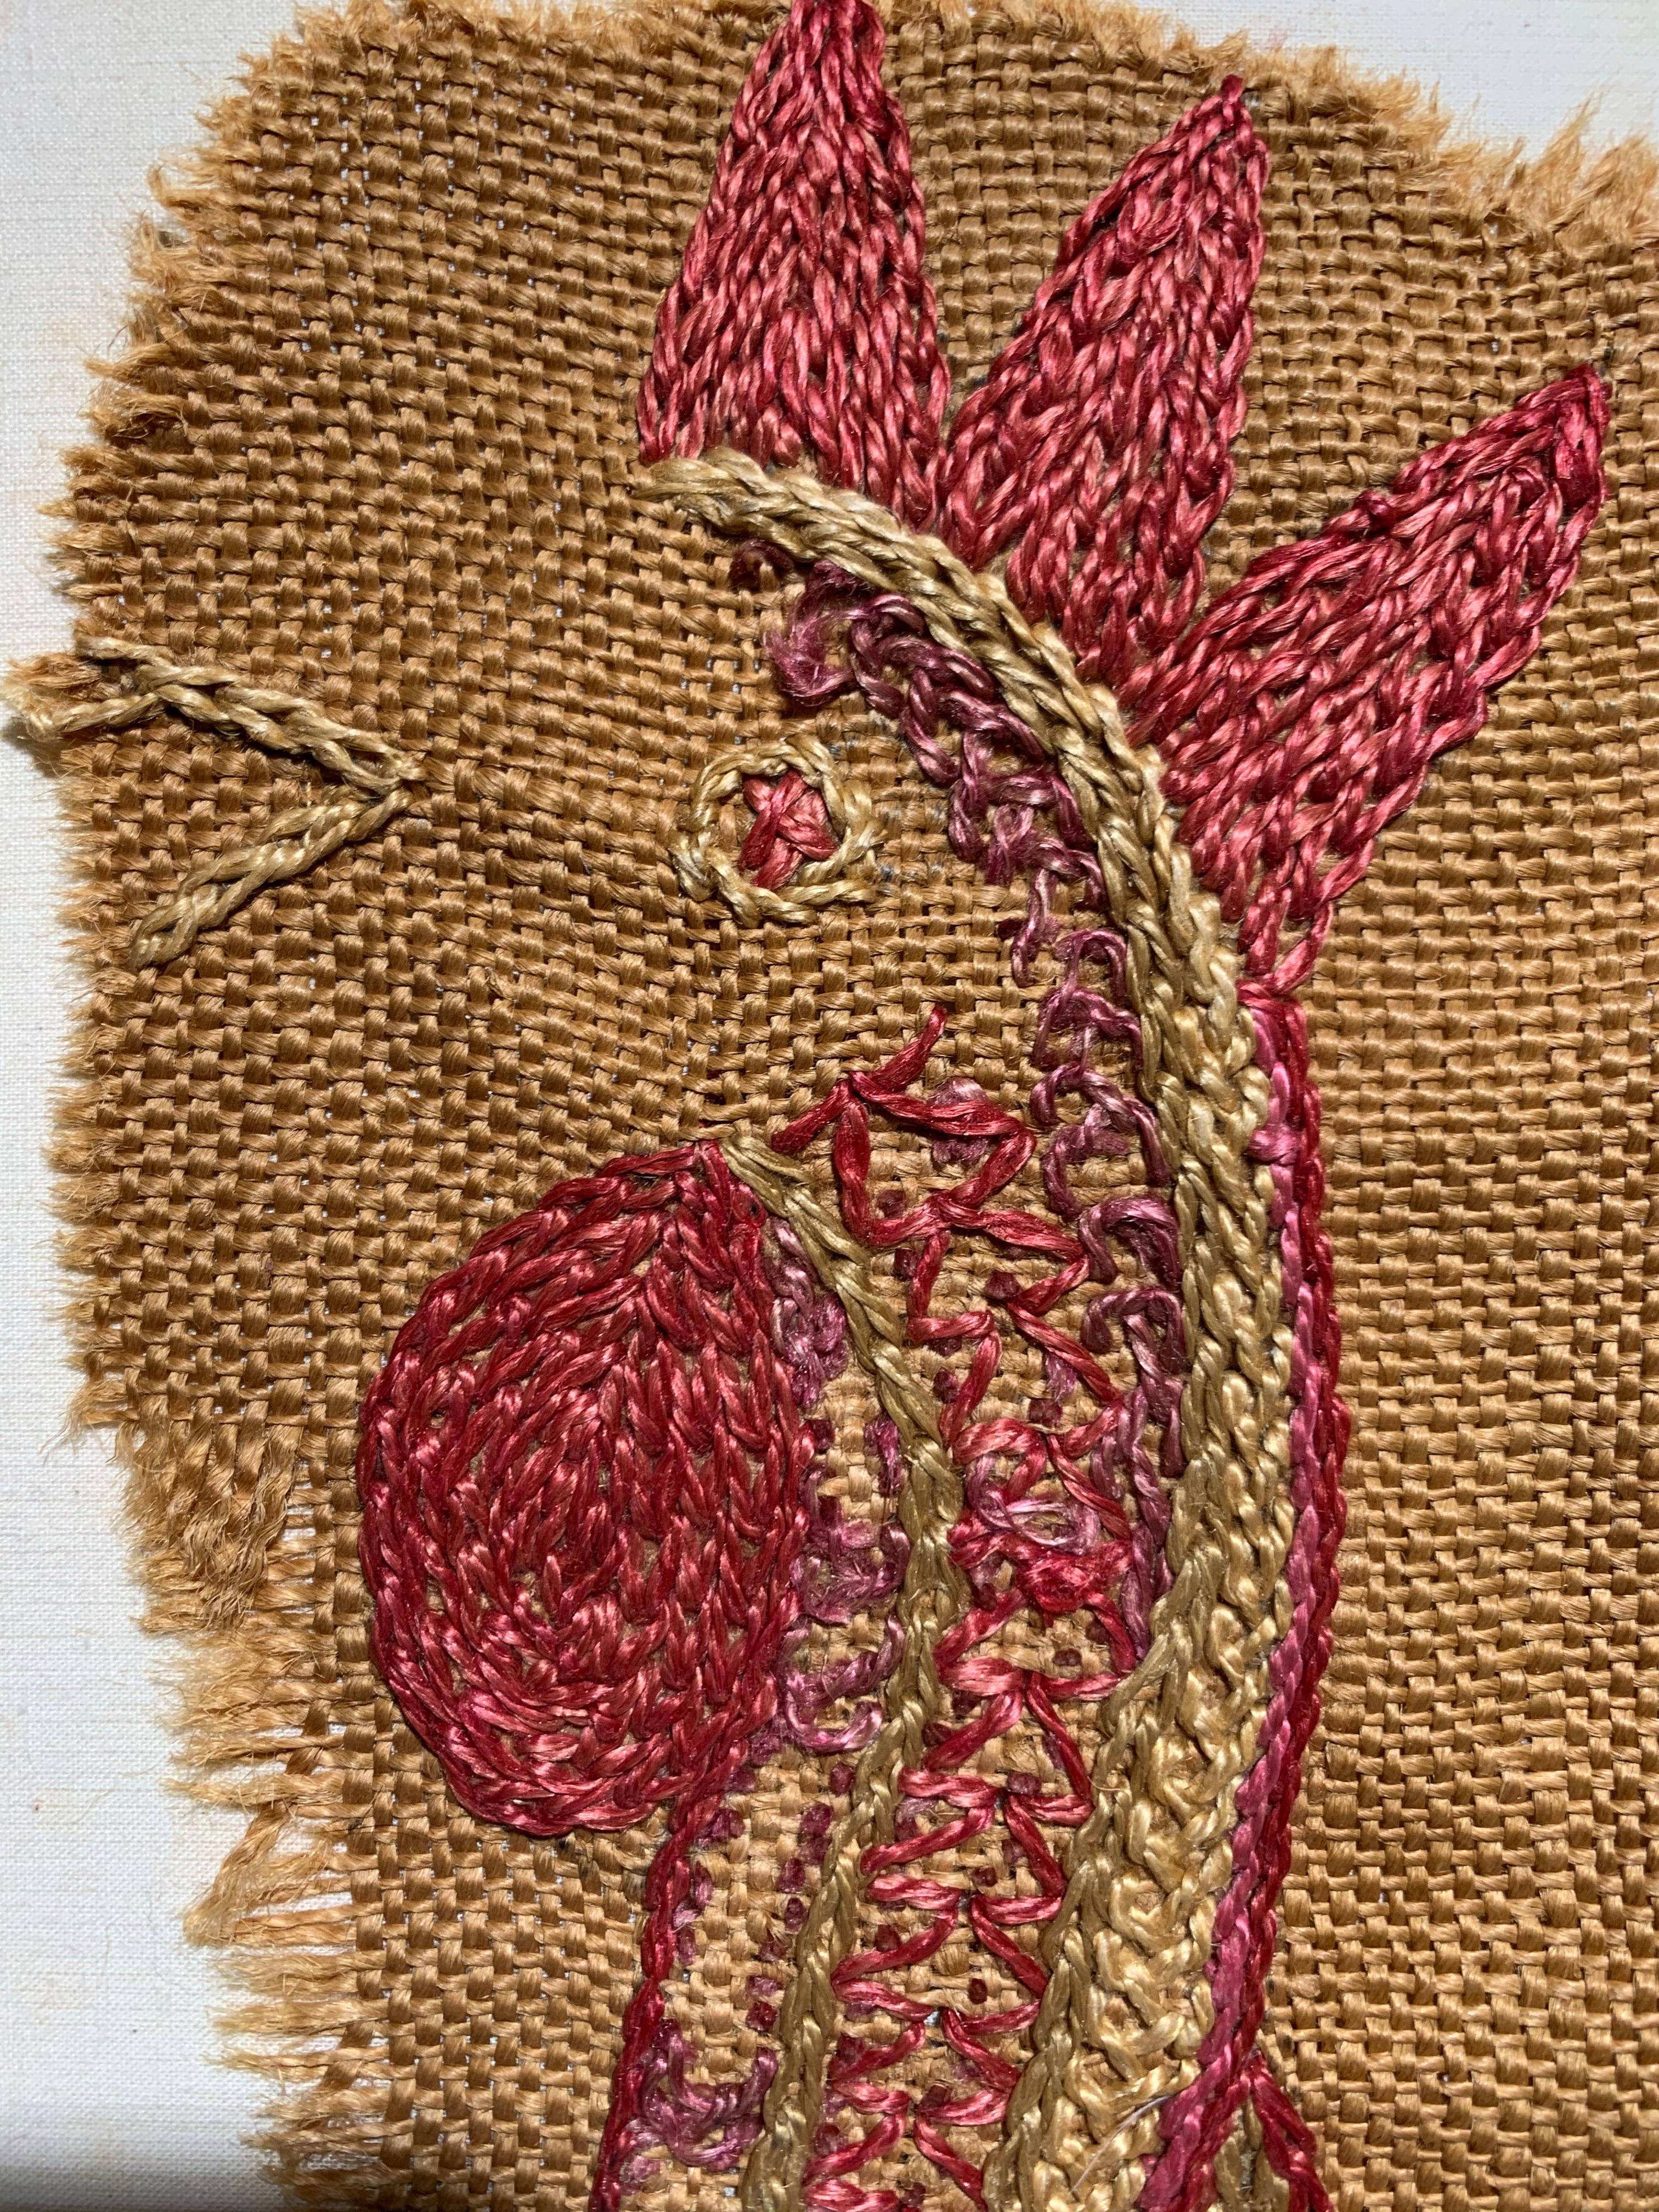 Eve Peri (1897-1966). Rooster, ca. 1935. Embroidered thread on burlap ground mounted to linen backing panel. panel measures 12.75 x 15.75 inches; 18.25 x 21.75 inches in contemporary custom frame with UV glass. Estate stamp affixed to back of panel